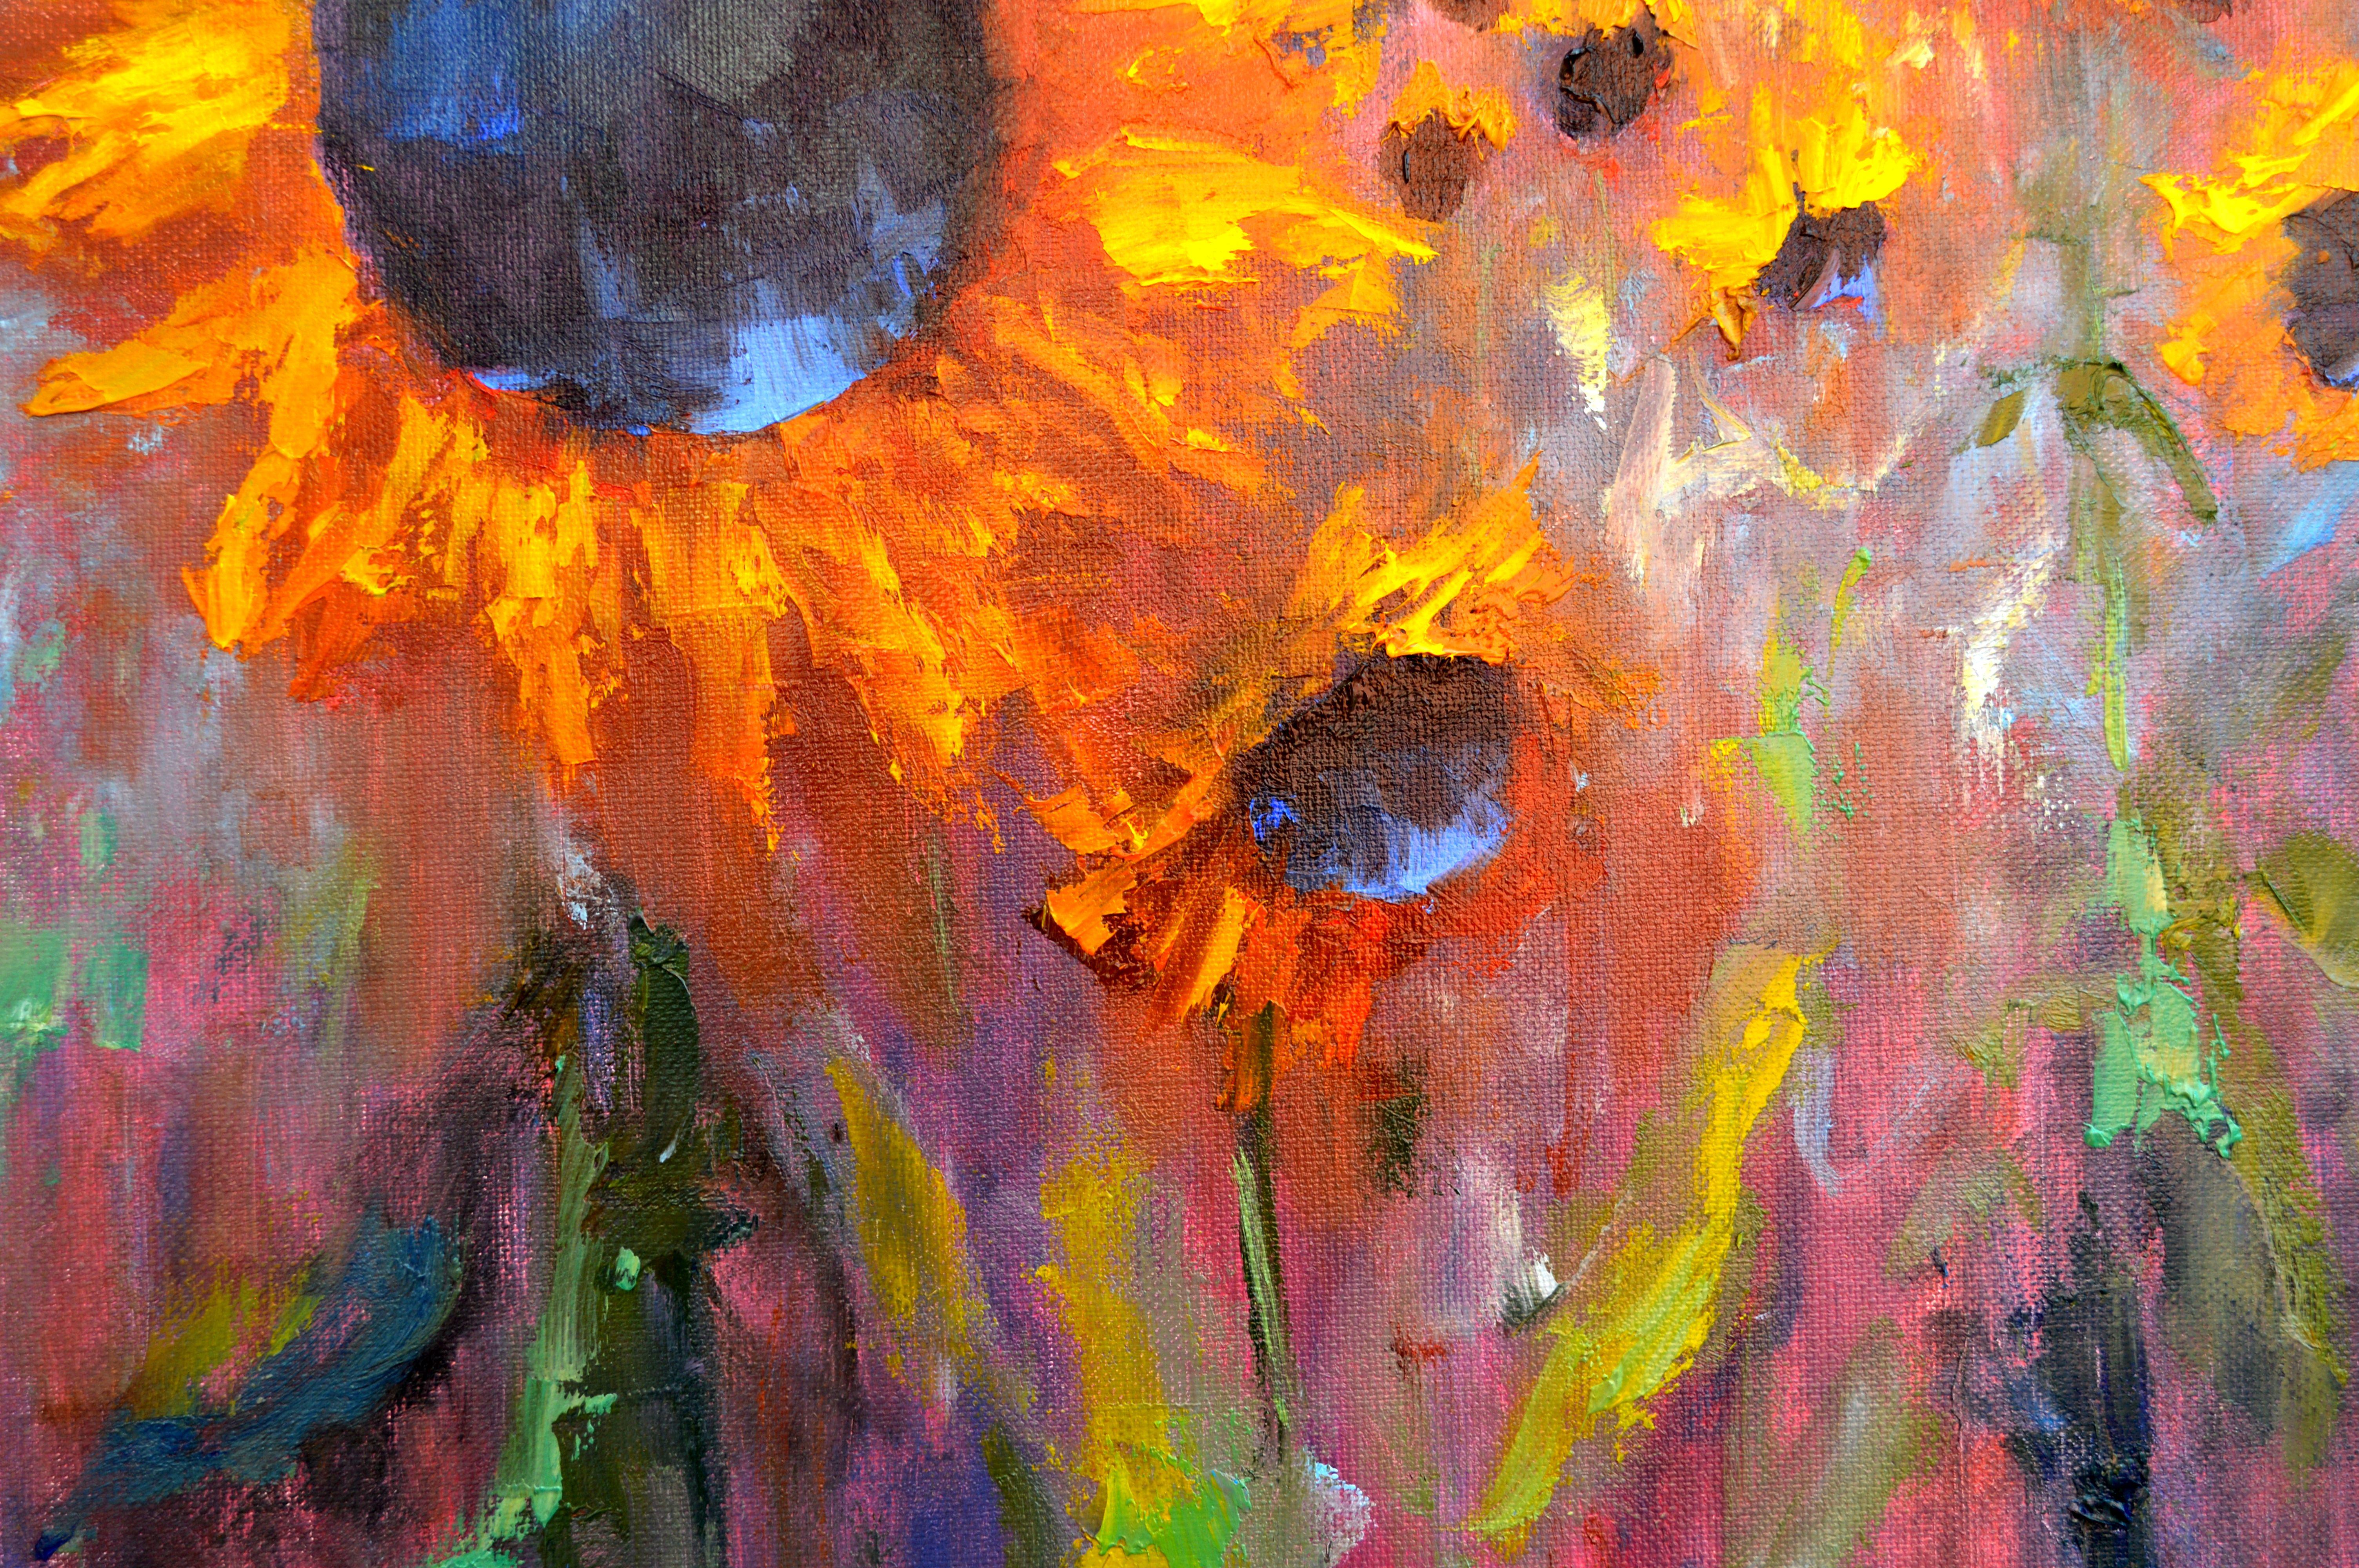 In this vibrant oil painting, I poured my heart into capturing the fierce beauty of sunflowers standing tall. Each stroke embodies the energy and warmth these flowers exude, blending impressionistic flair with realistic detail. The piece radiates a